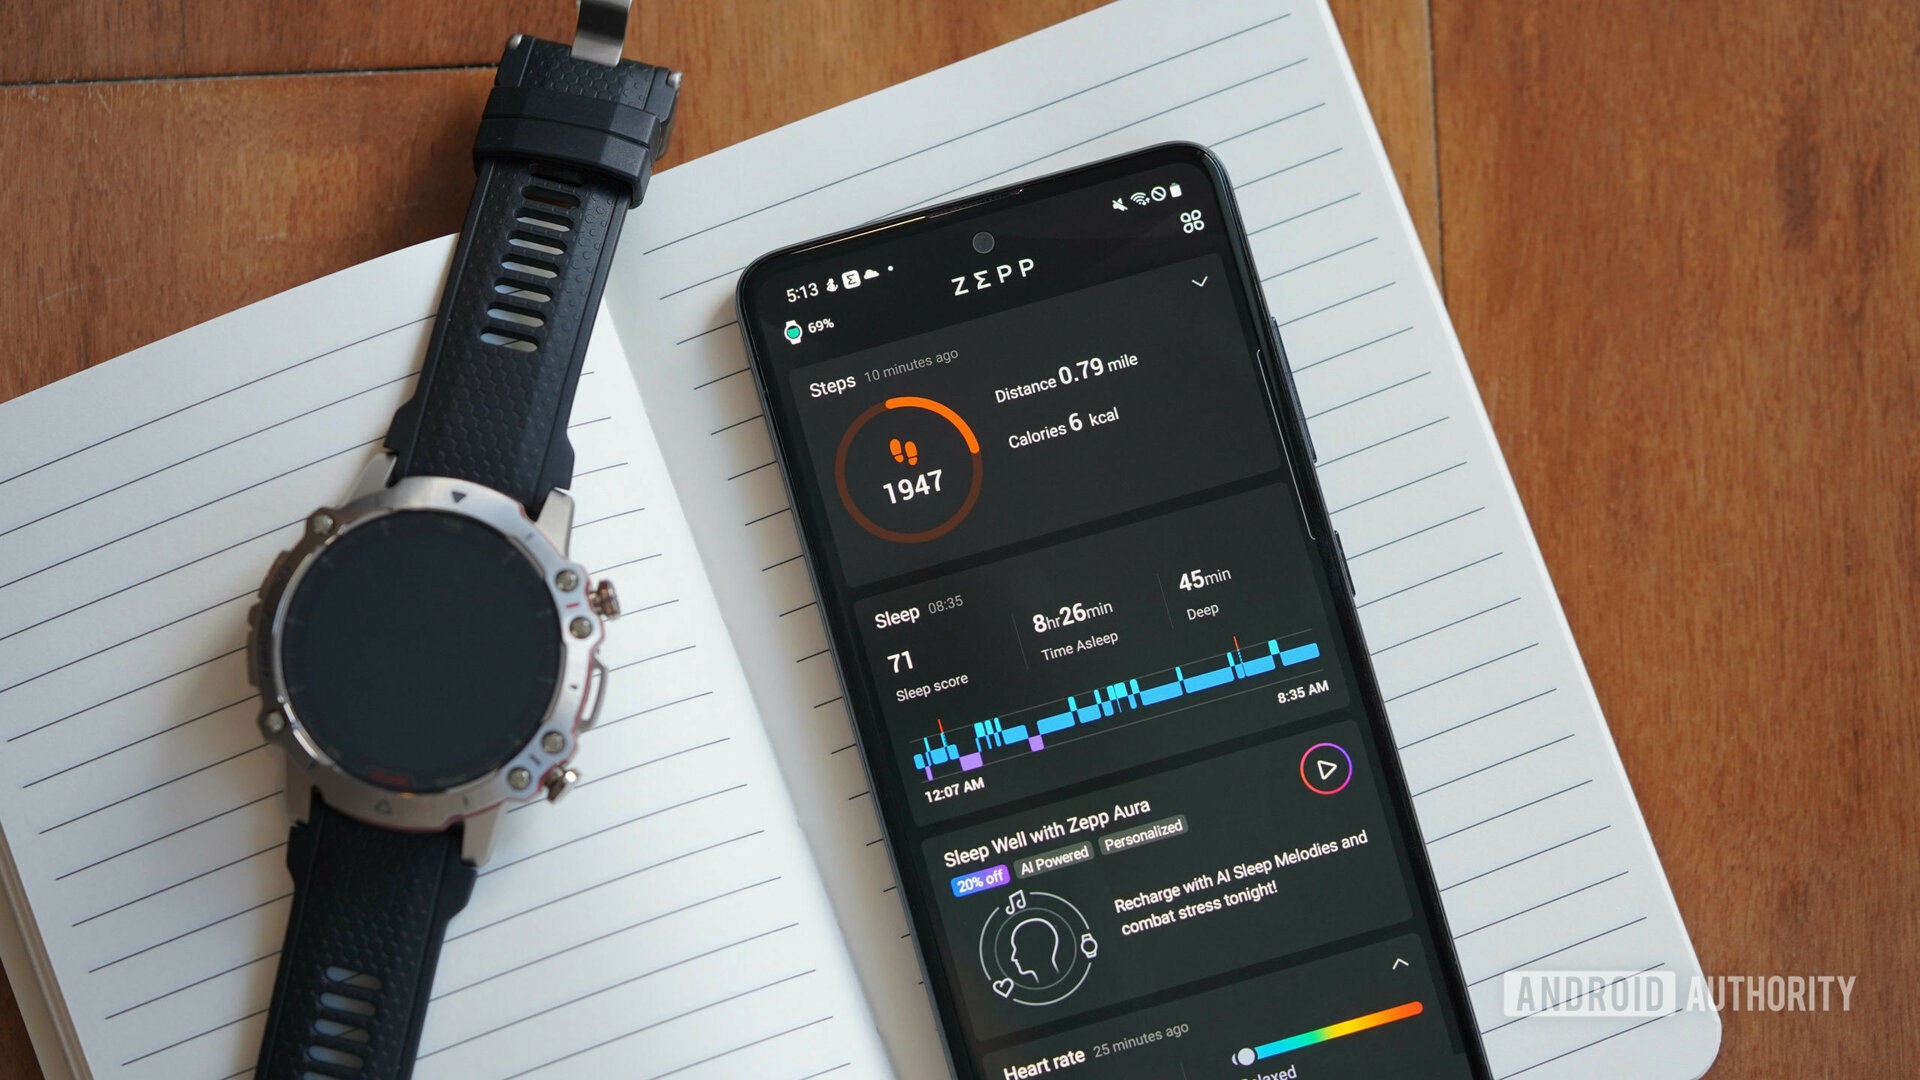 An Amazfit Falcon rests alongside an Android phone displaying the Zepp app.